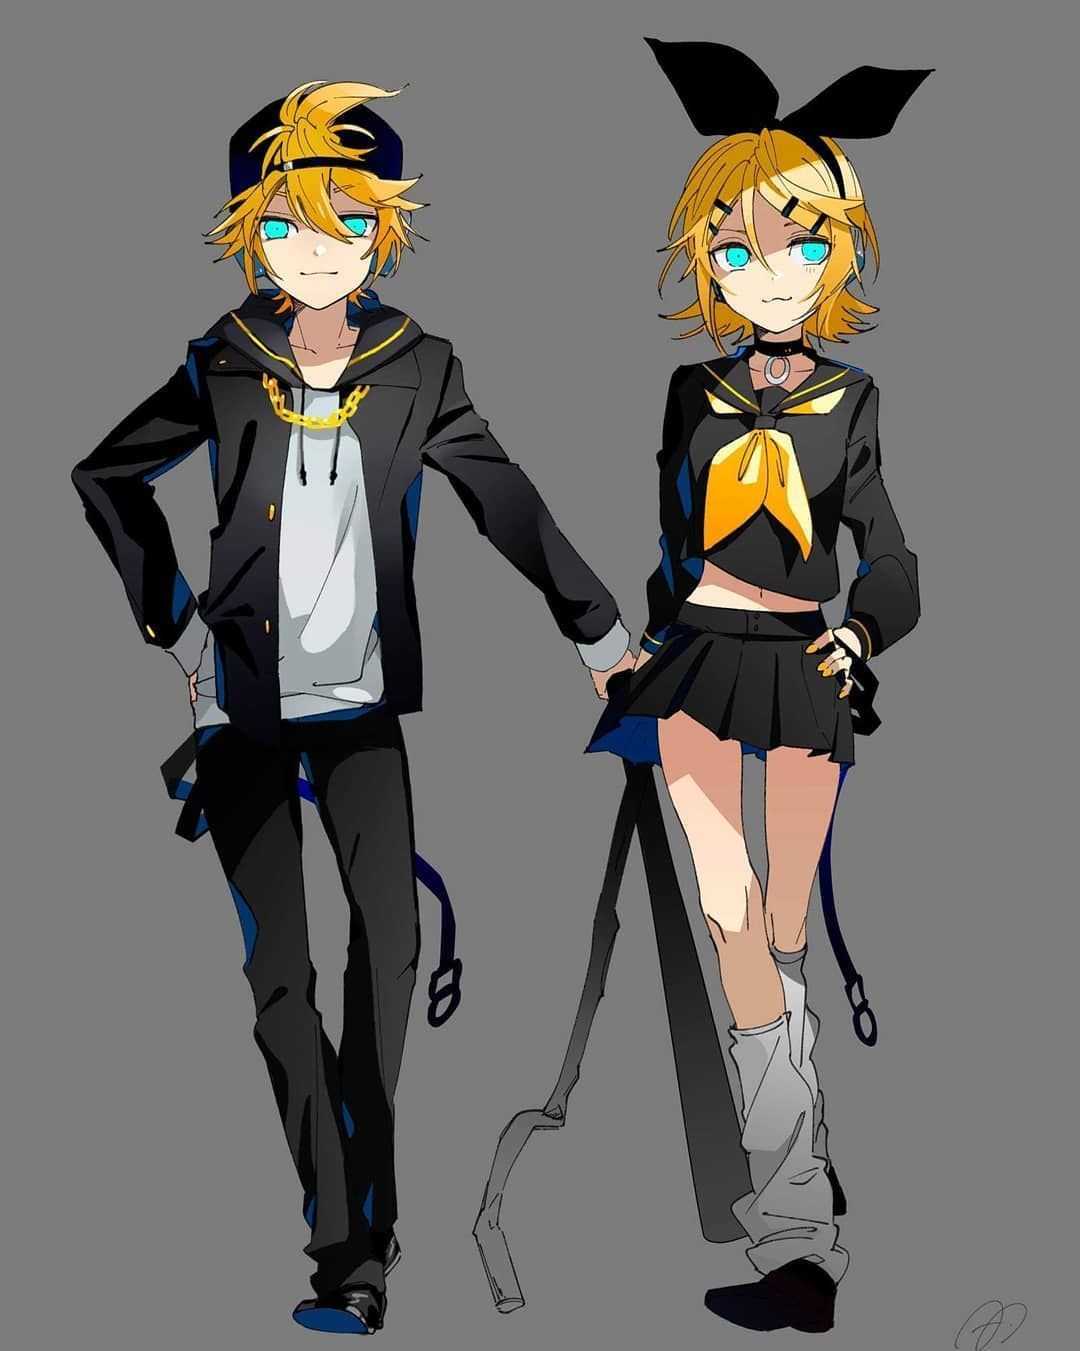 They look so cool #. .. . vocaloid chars: kagamine rin. Vocaloid, Vocaloid characters, Rin cosplay